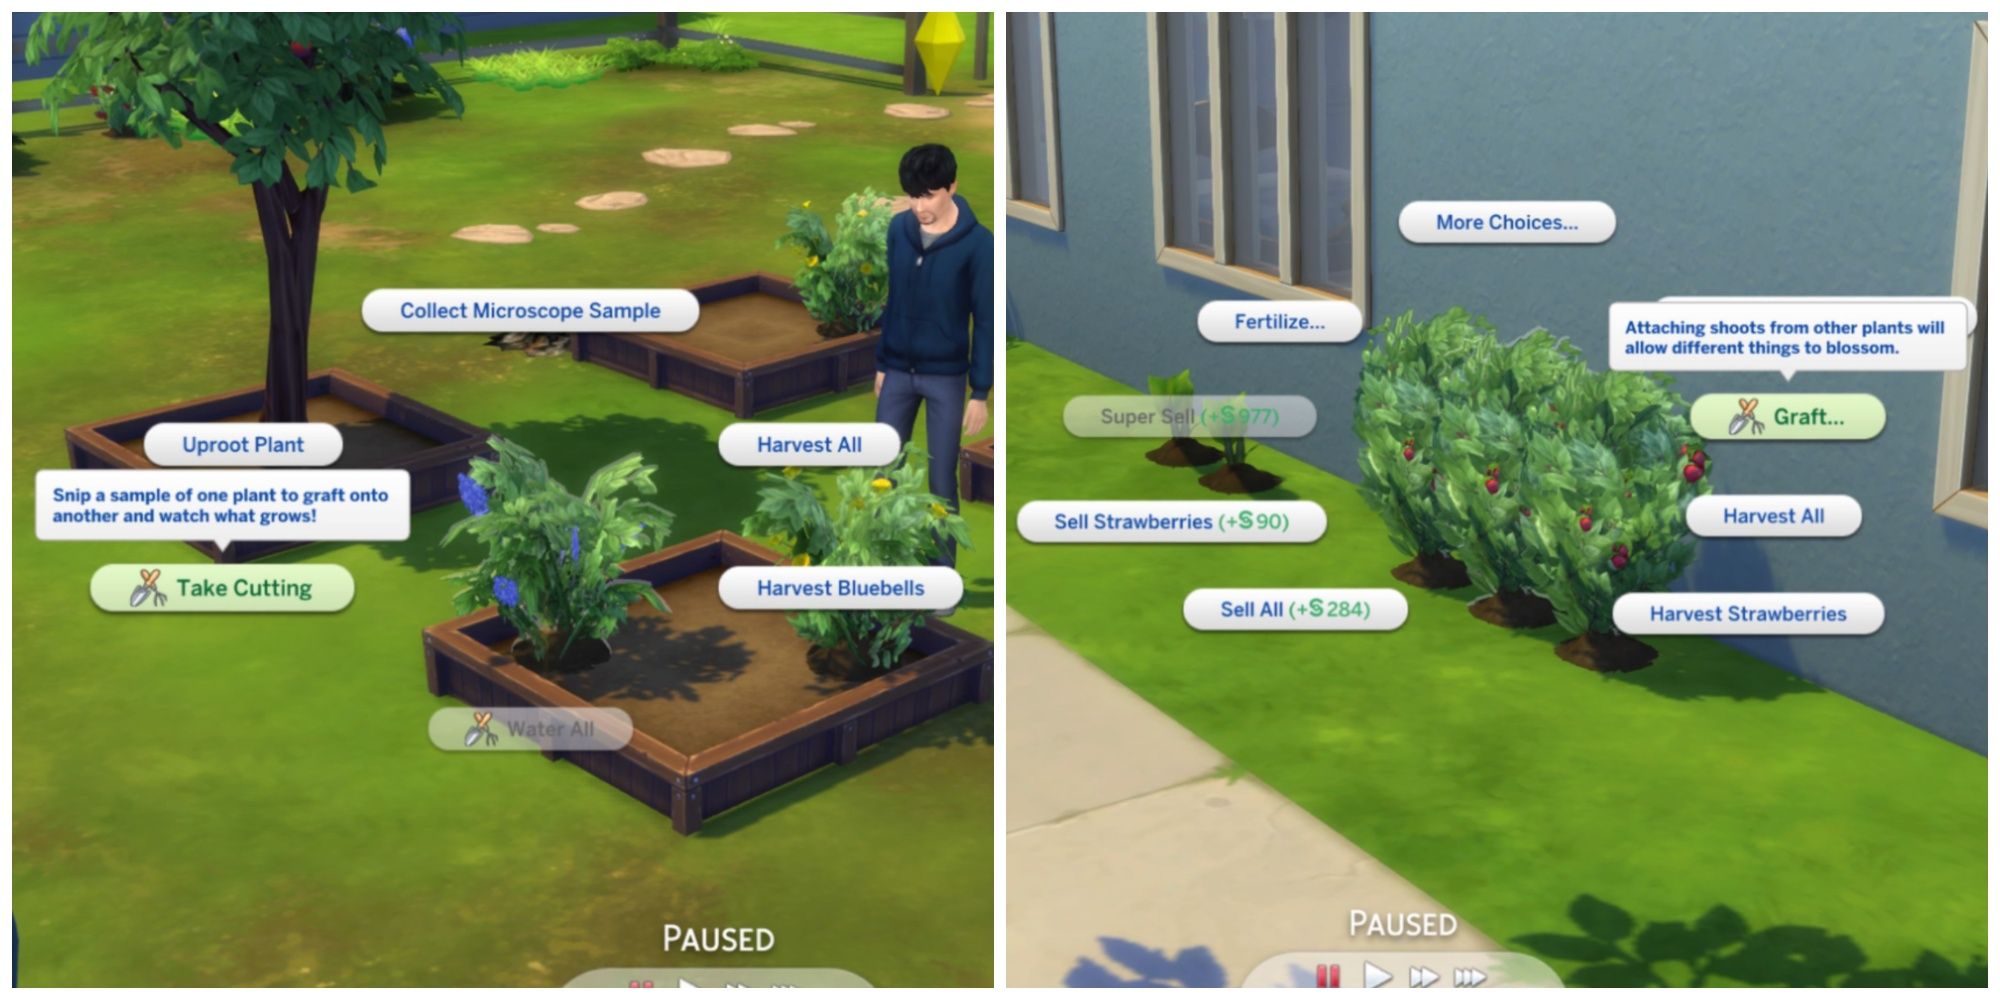 Cutting and grafting plants in The Sims 4